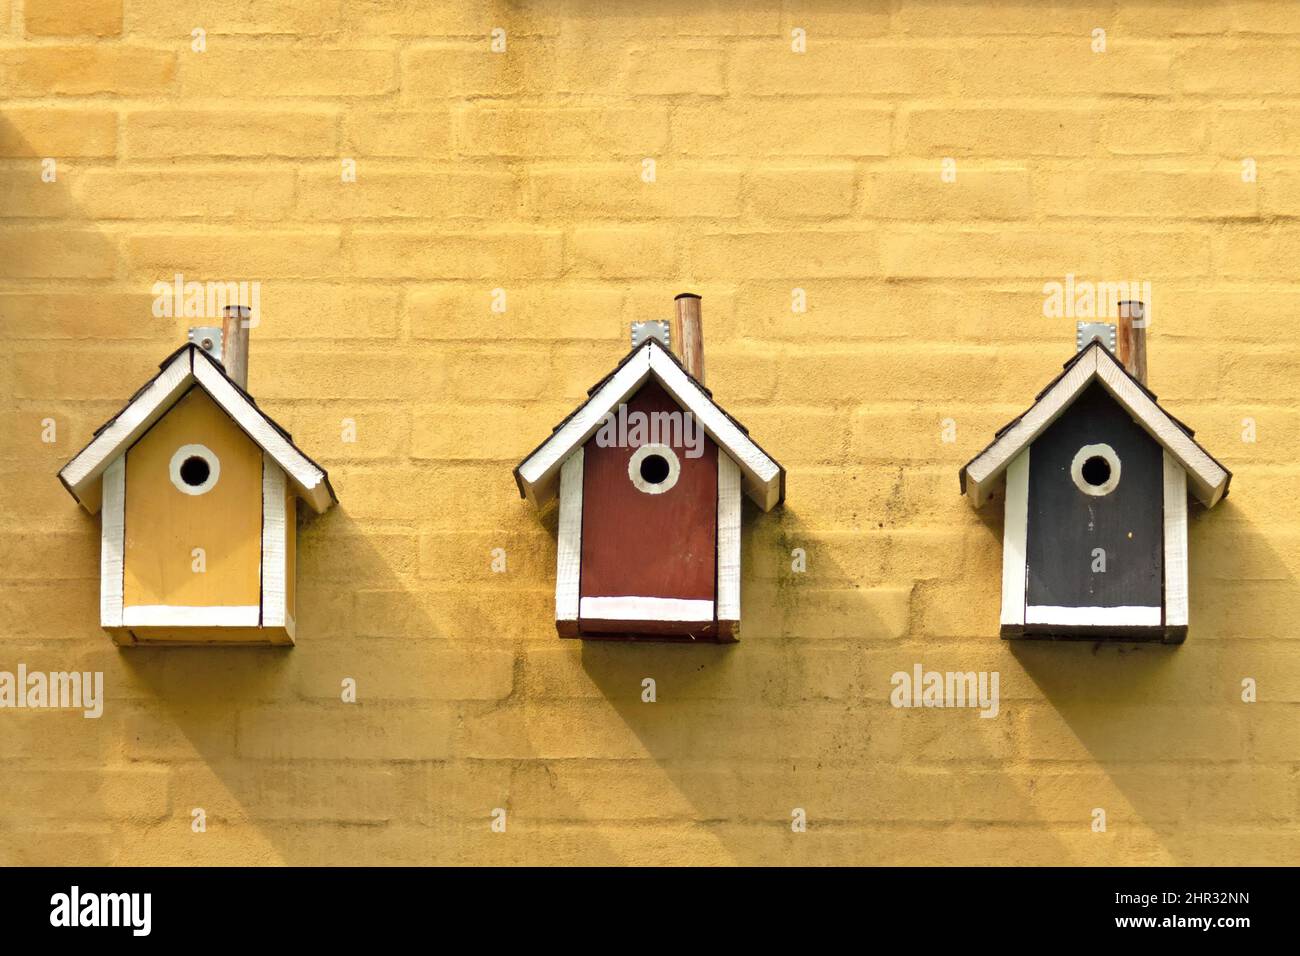 Three bird nesting boxes in different colors hanging on a yellow house wall Stock Photo